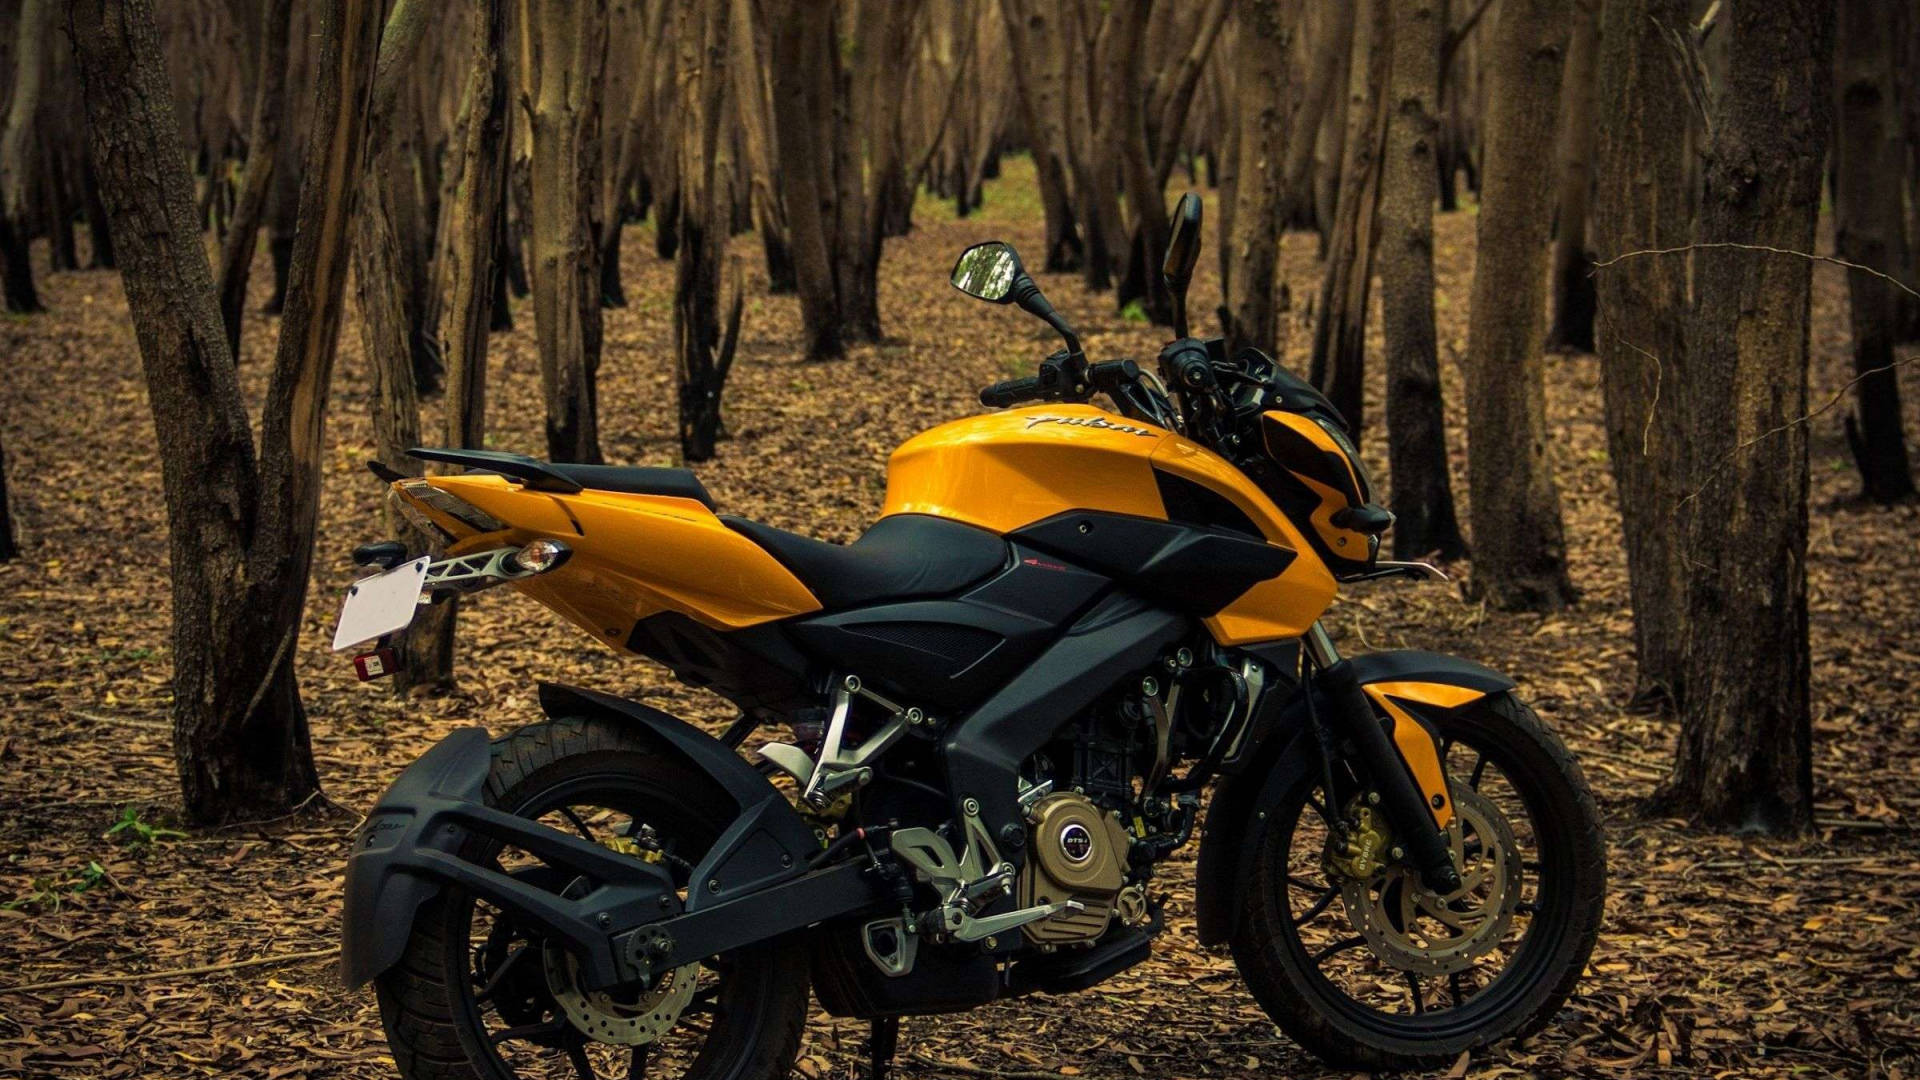 Powerful Pulsar Rs200 In The Depth Of The Forest Background